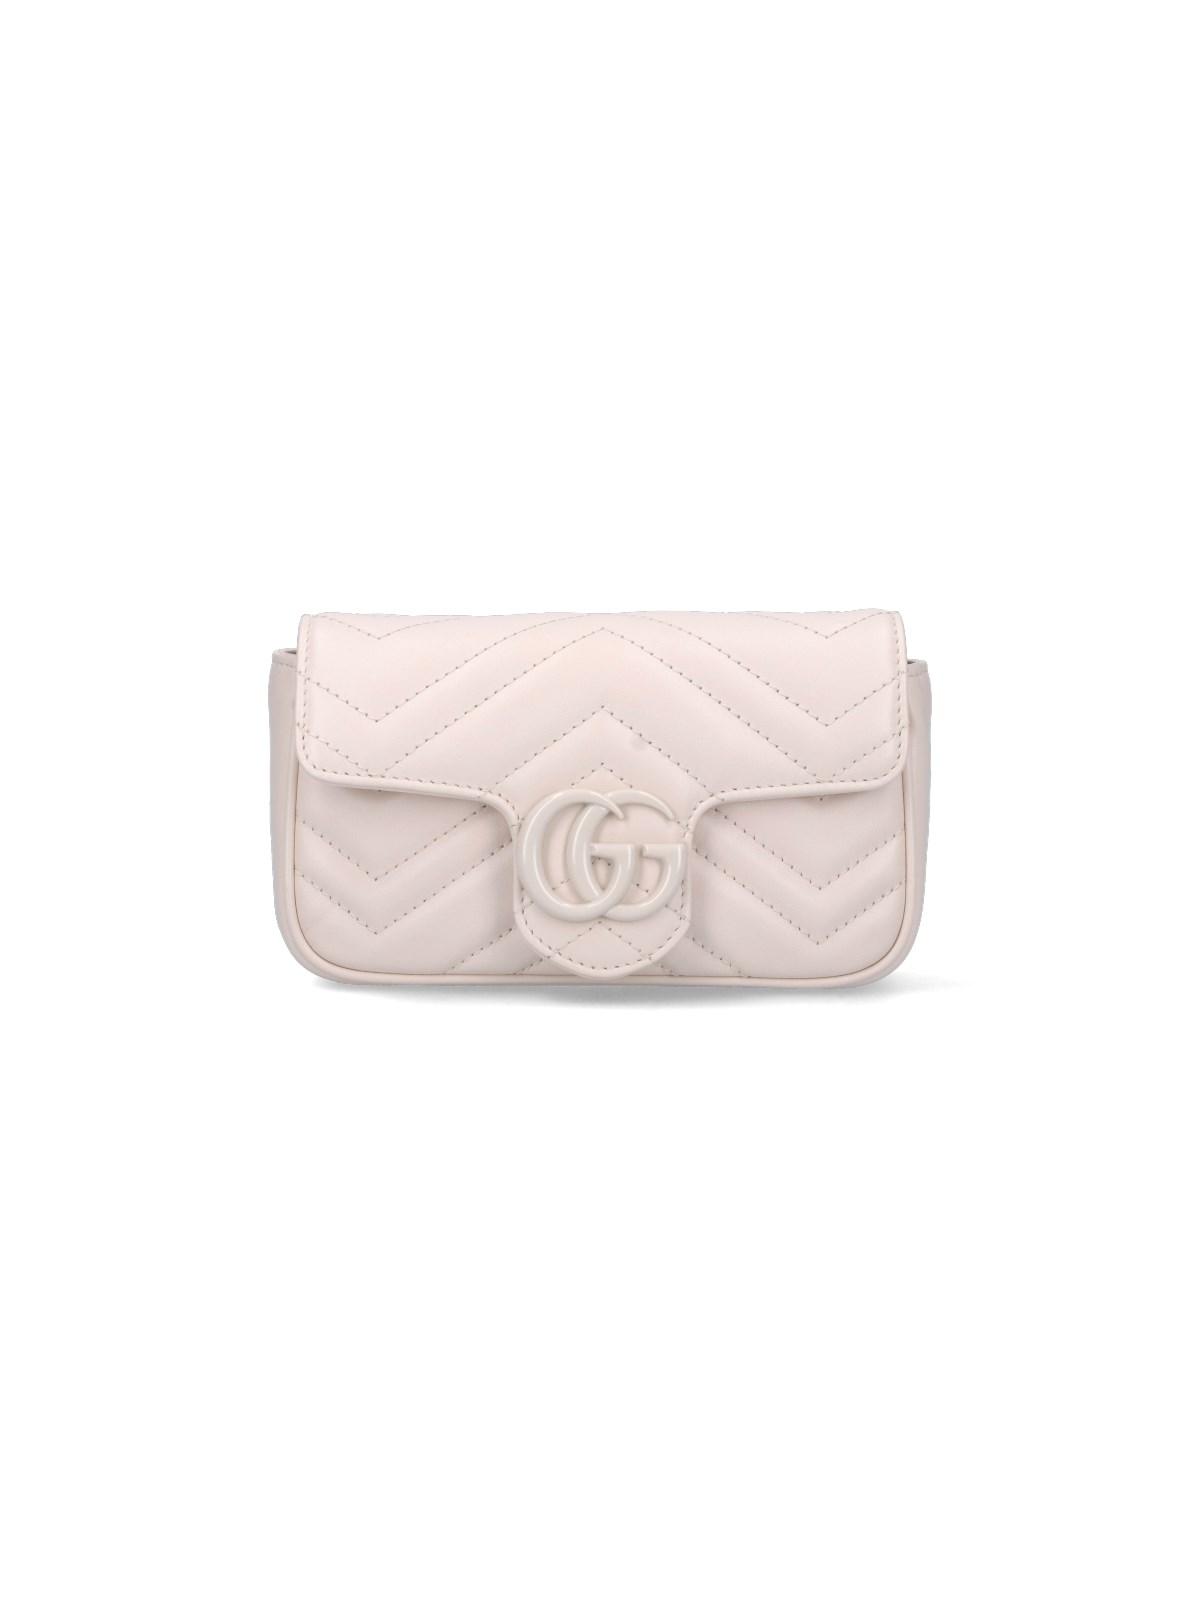 Gucci GG Marmont Leather Super Mini Bag | Mystic White | Os | The Webster